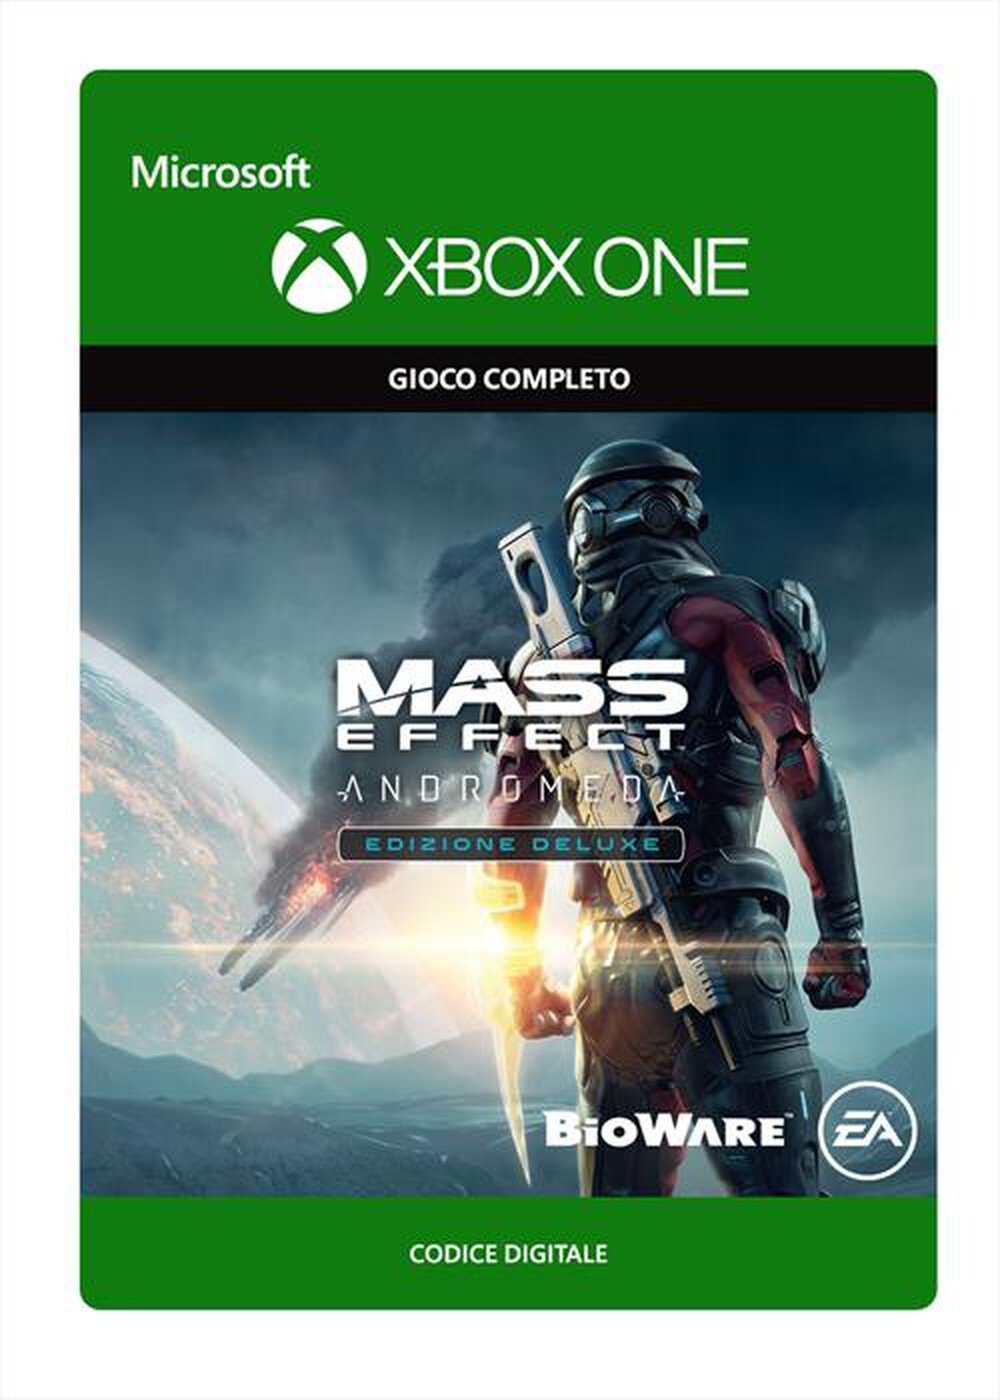 "MICROSOFT - Mass Effect: Andromeda Deluxe Edition - "